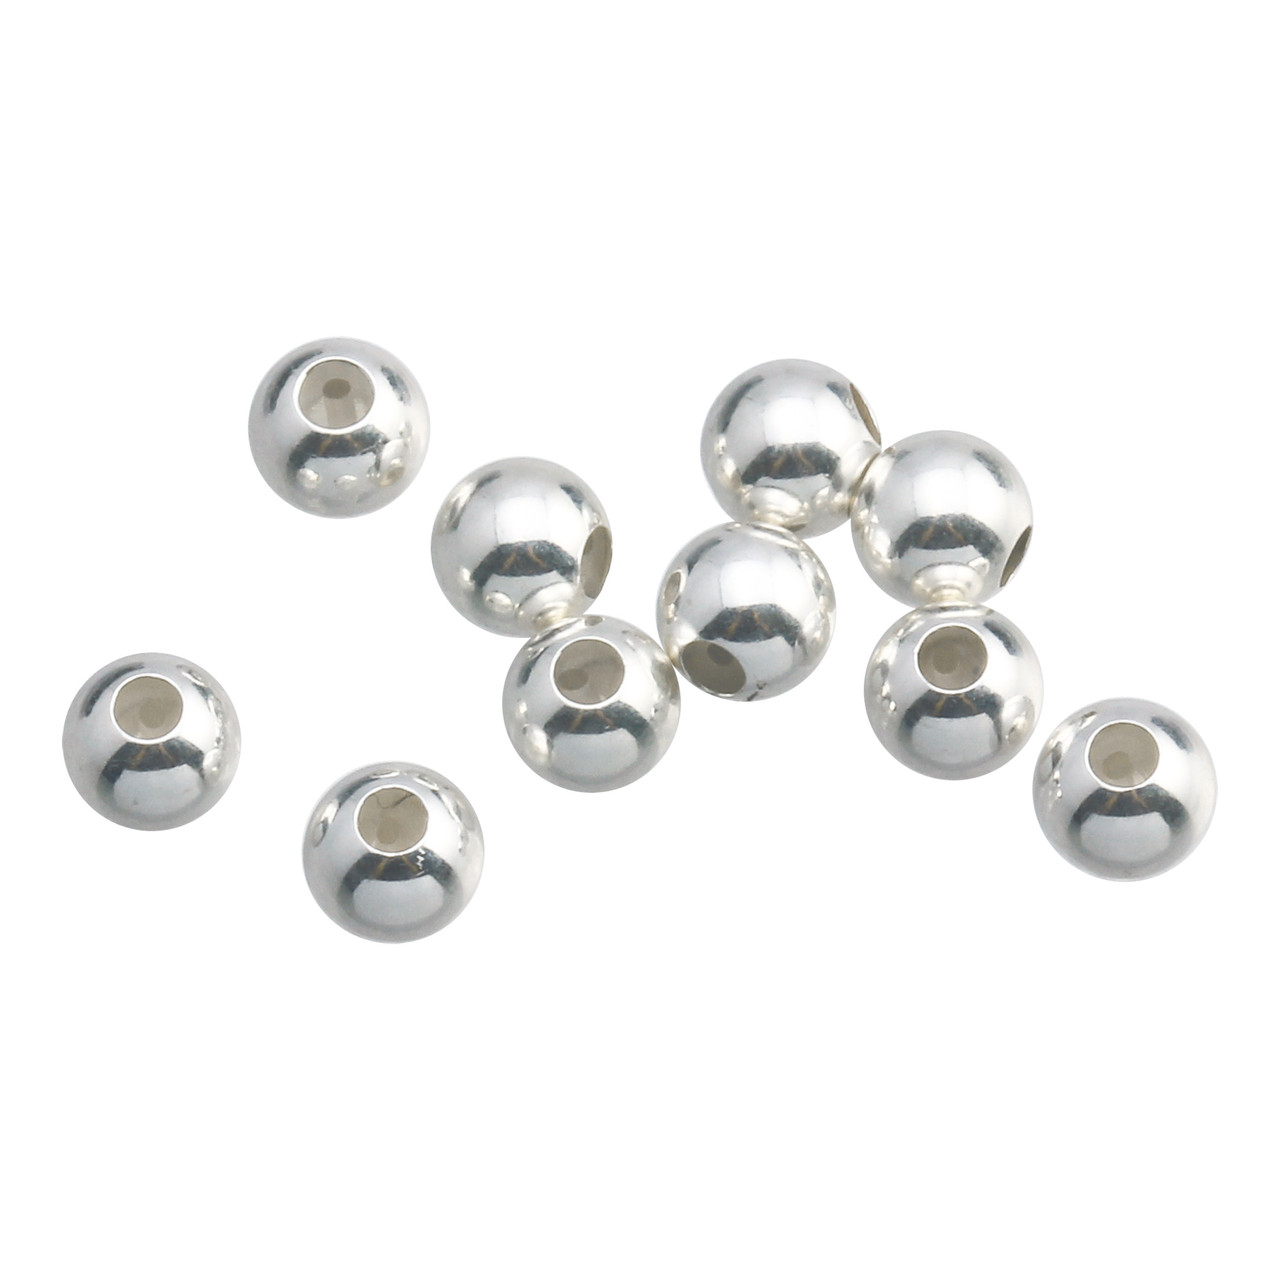 5 Pcs 4 mm Sterling Silver Silicone Beads